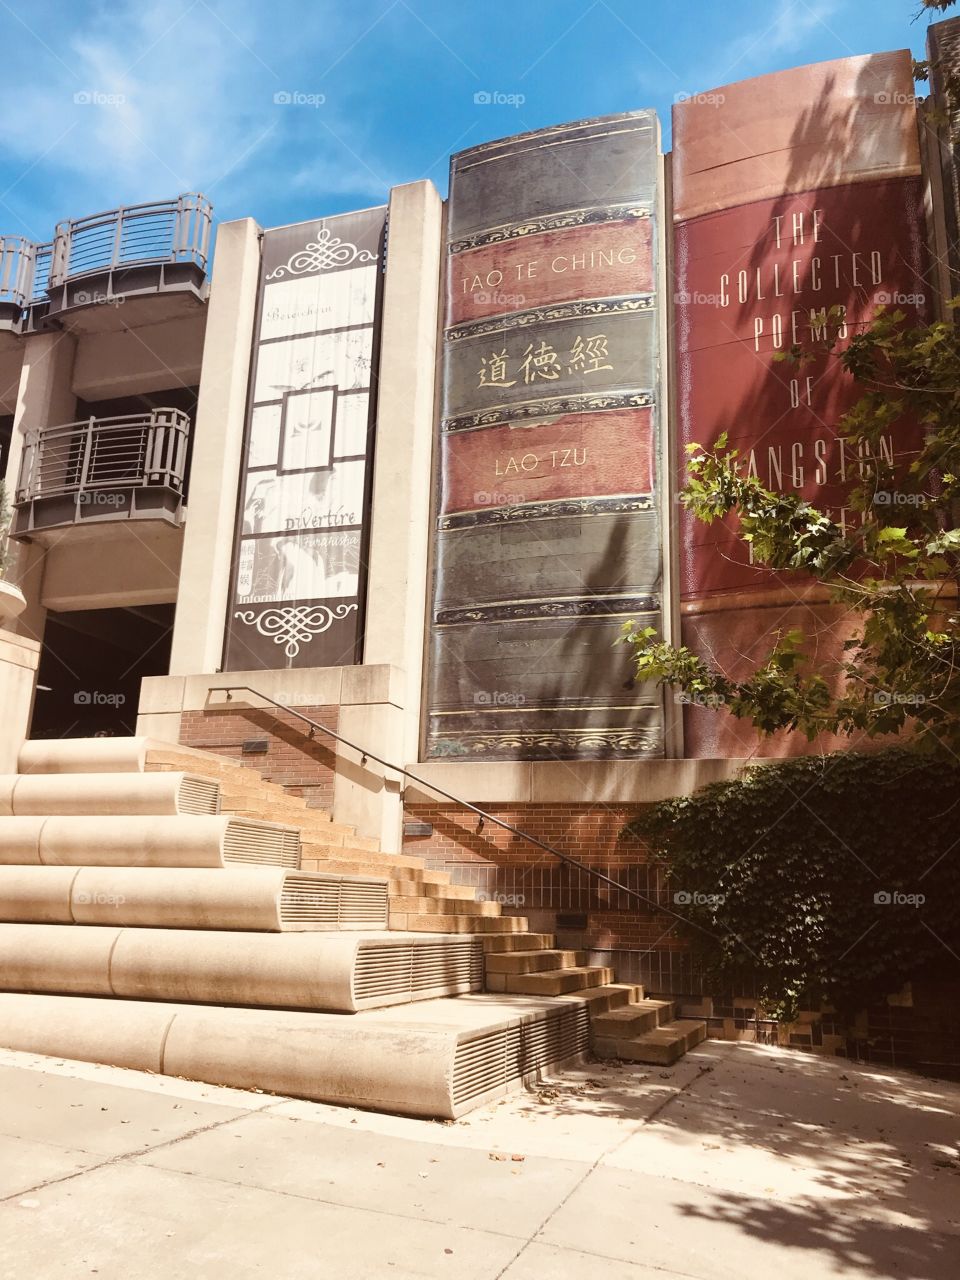 Gorgeous wall mural on library in Kansas City, MO of books lined up and the building is even complete with books stacked on each other for steps!! 